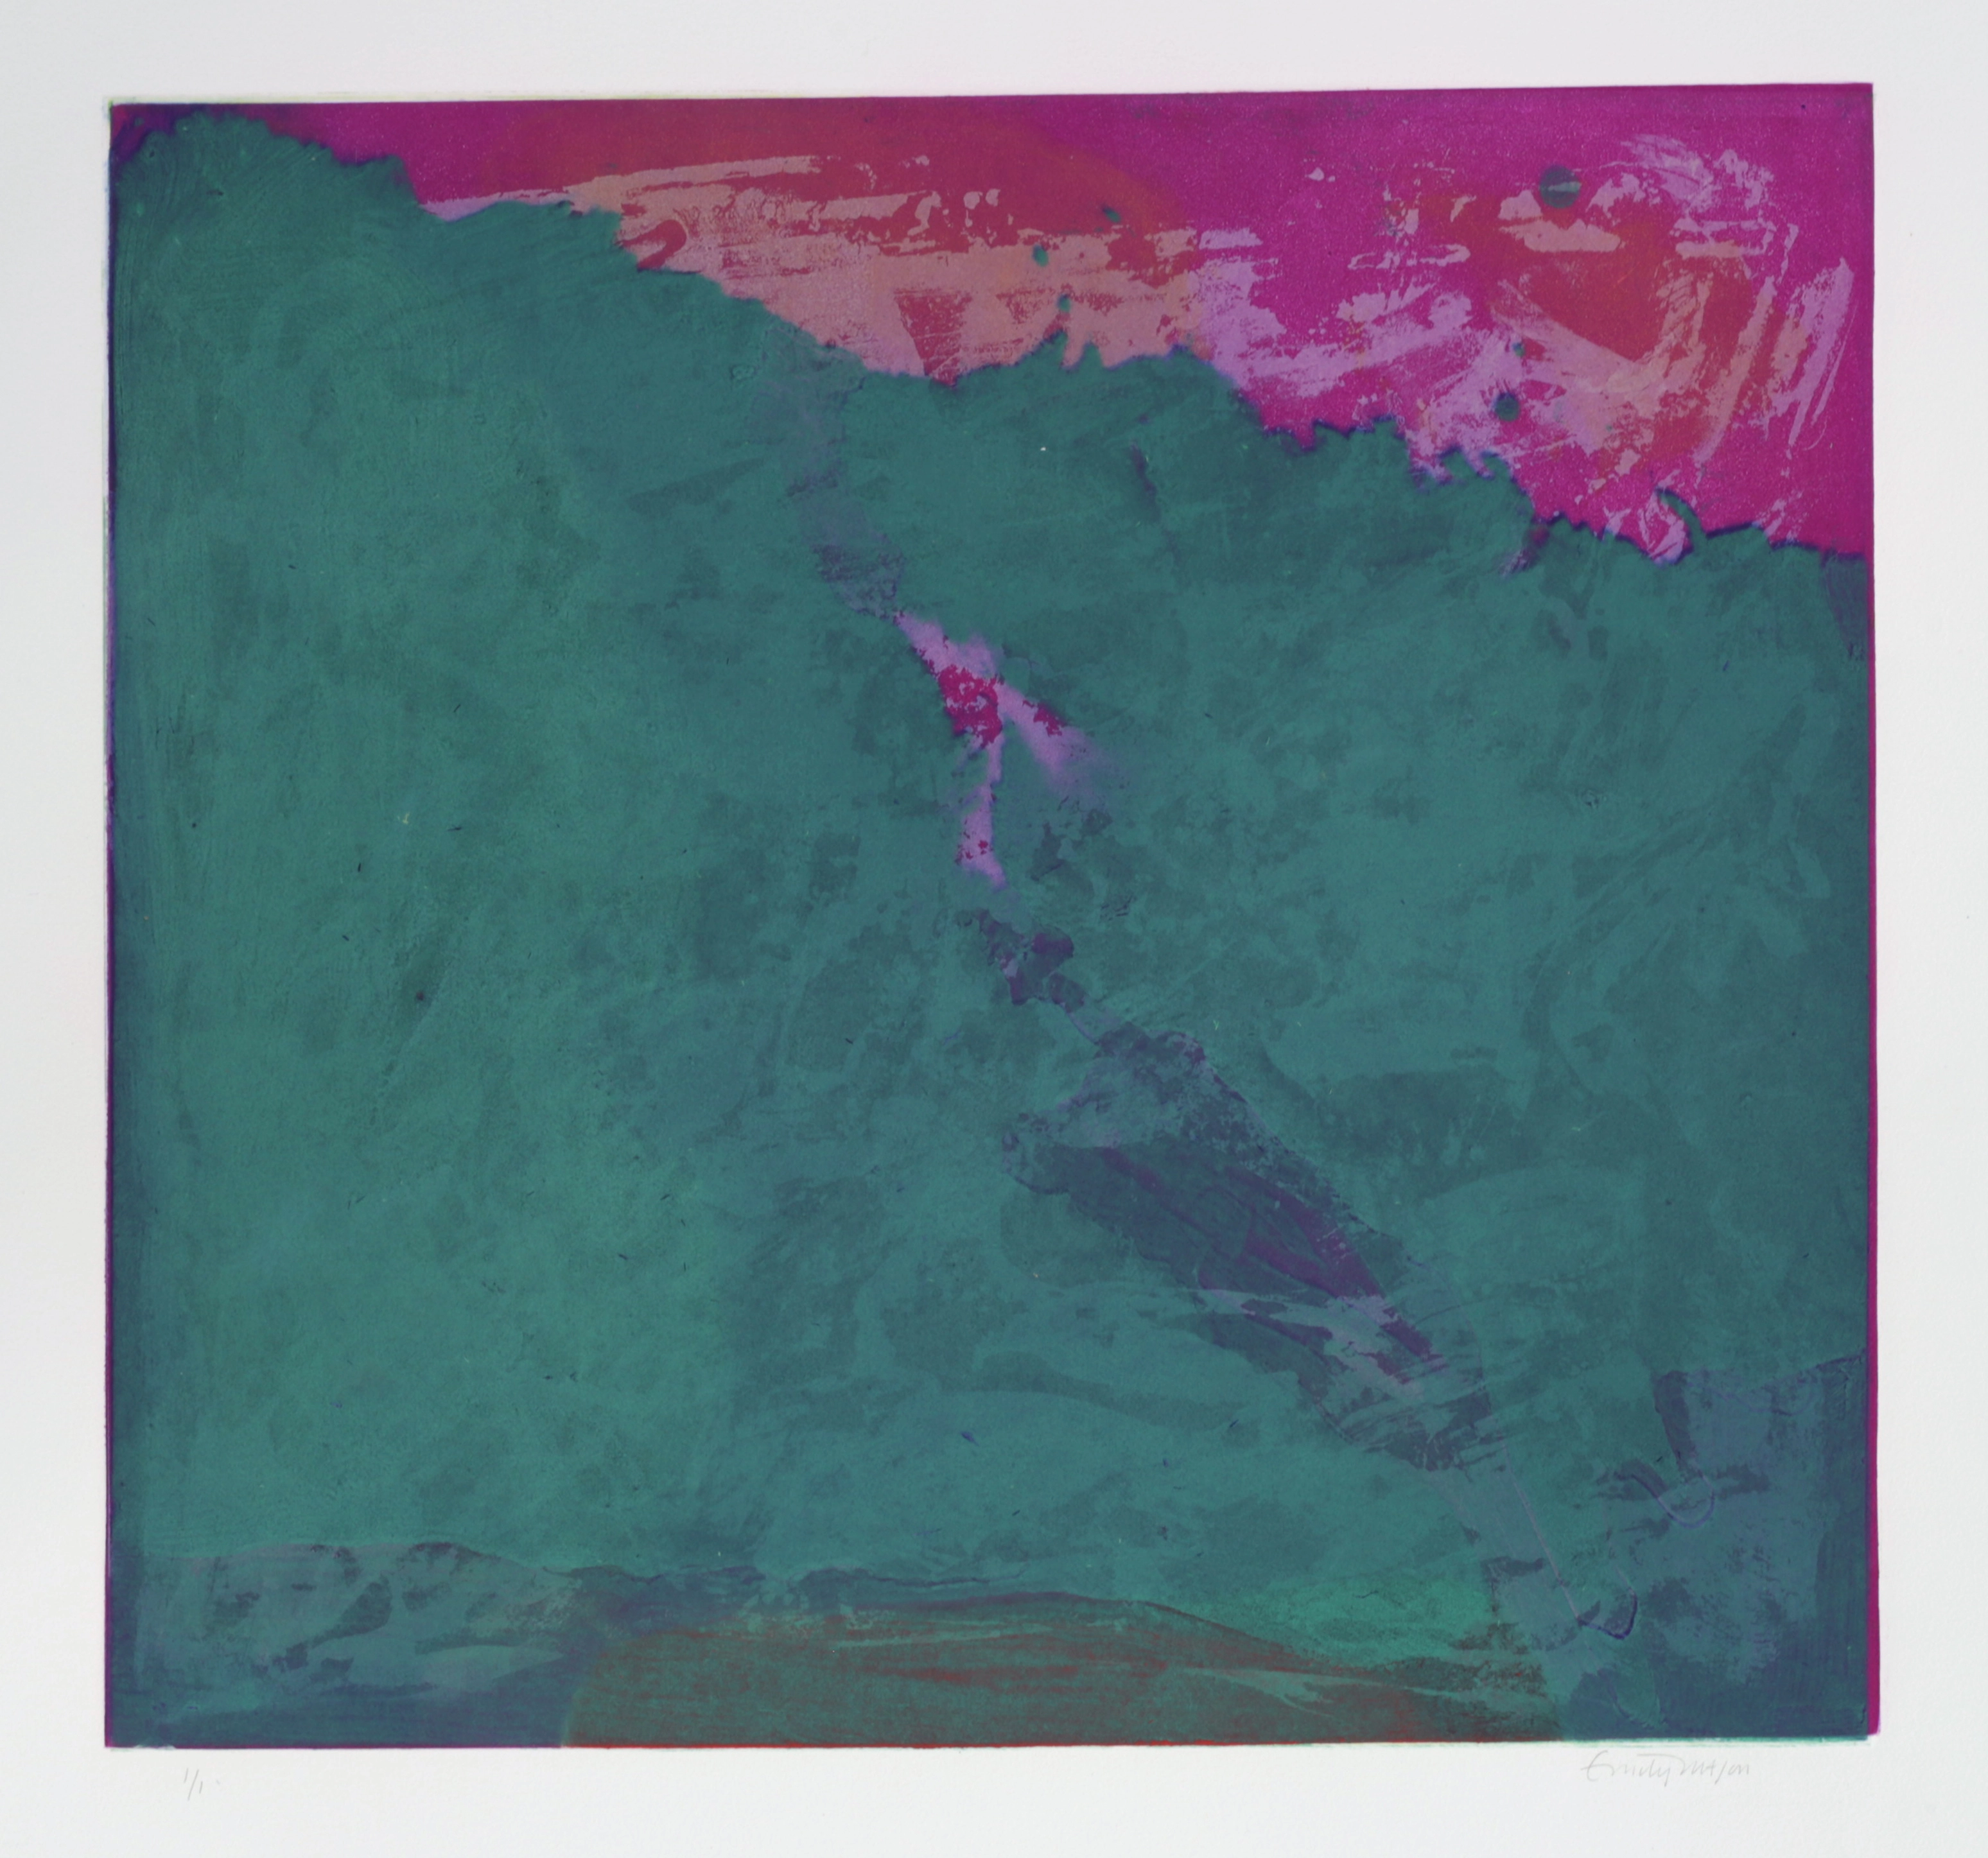 Monoprint on paper of a large blue-green form with magenta in the upper-right background.